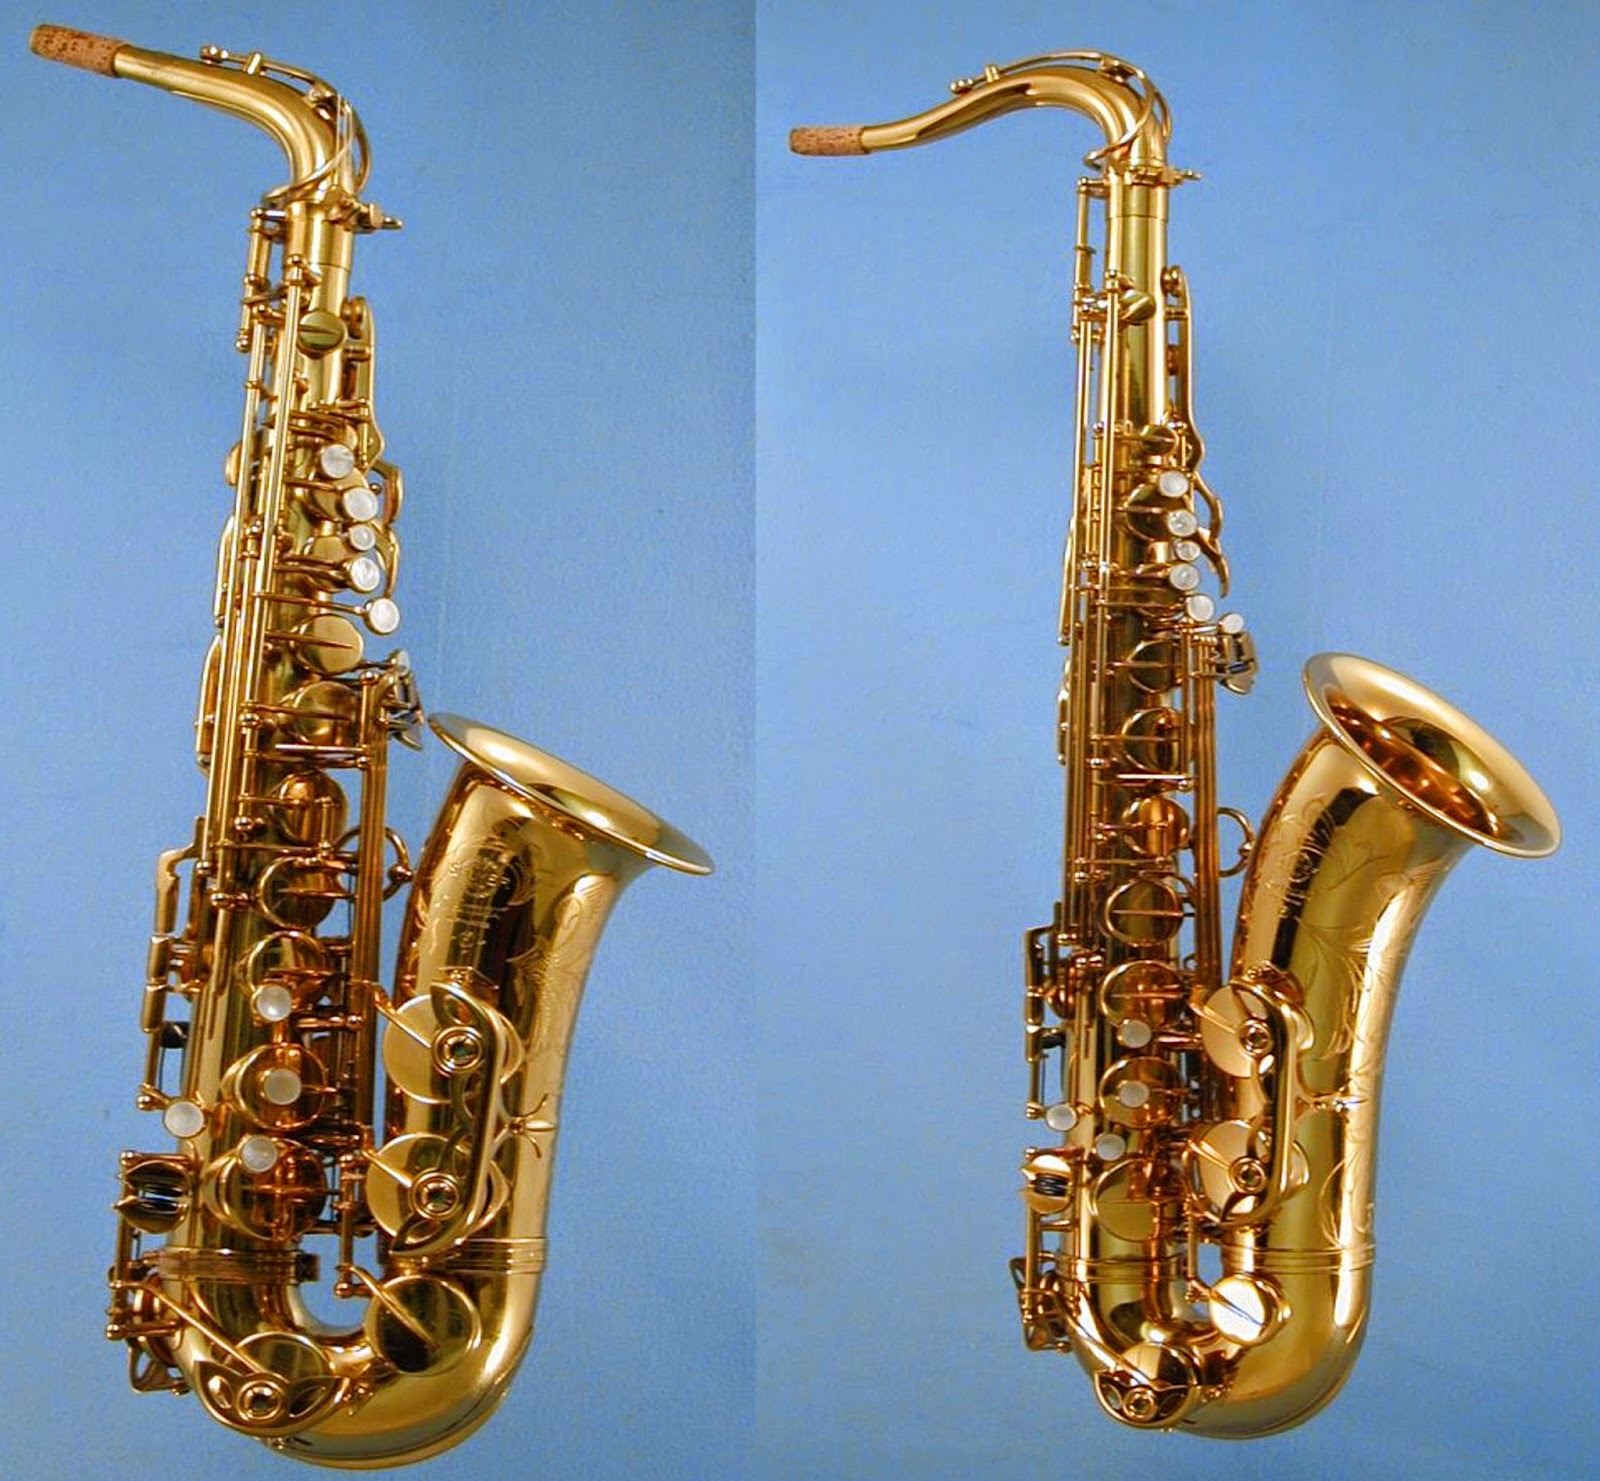 yamaha saxophone serial number chart. all categories letterflo. 